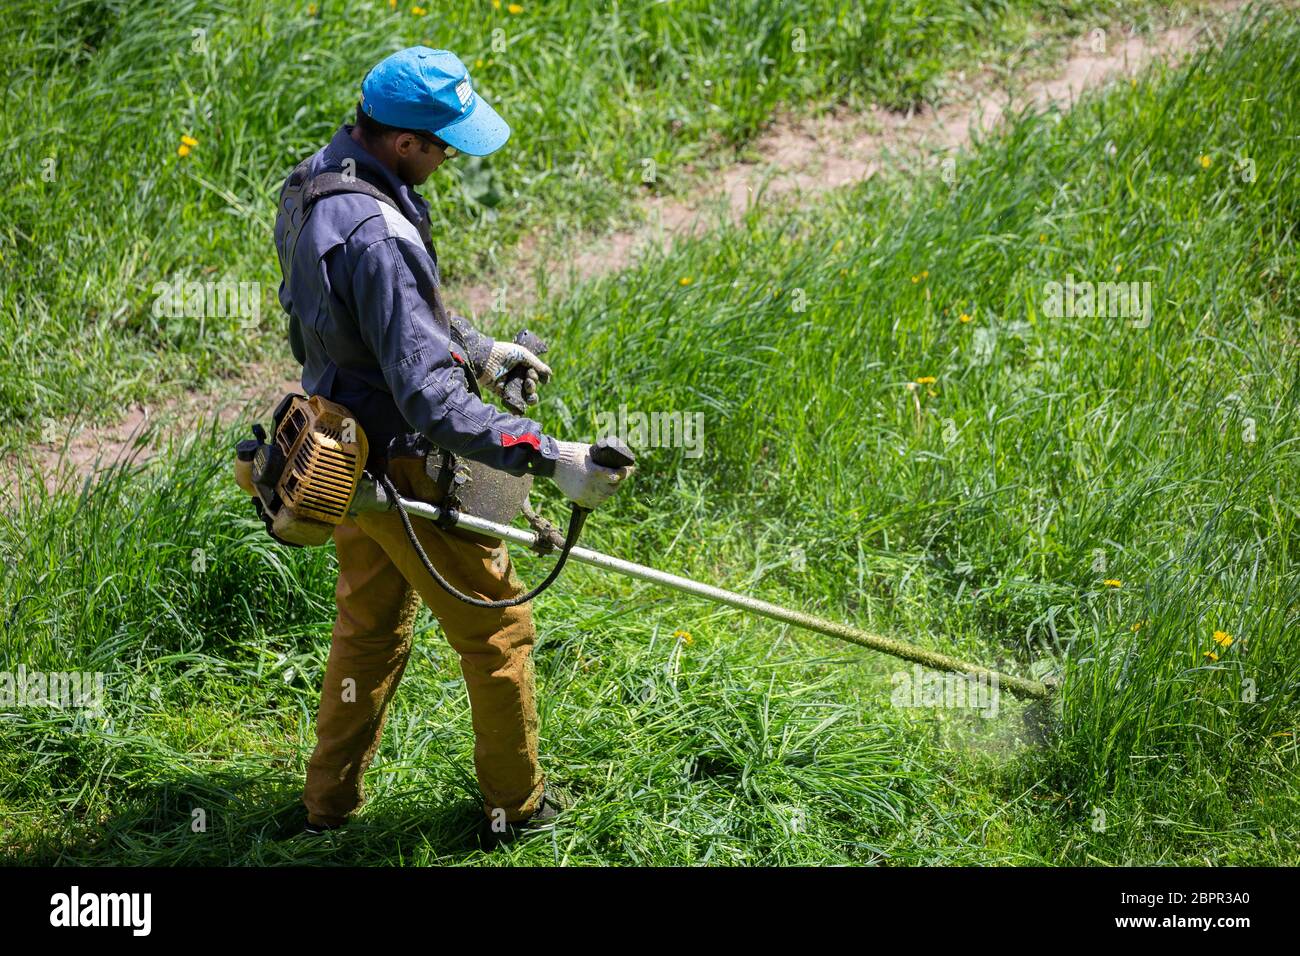 TULA, RUSSIA - MAY 19, 2020: Russian official lawnmower worker man cutting green grass with two-cycle engine string trimmer. Top to down view. Stock Photo